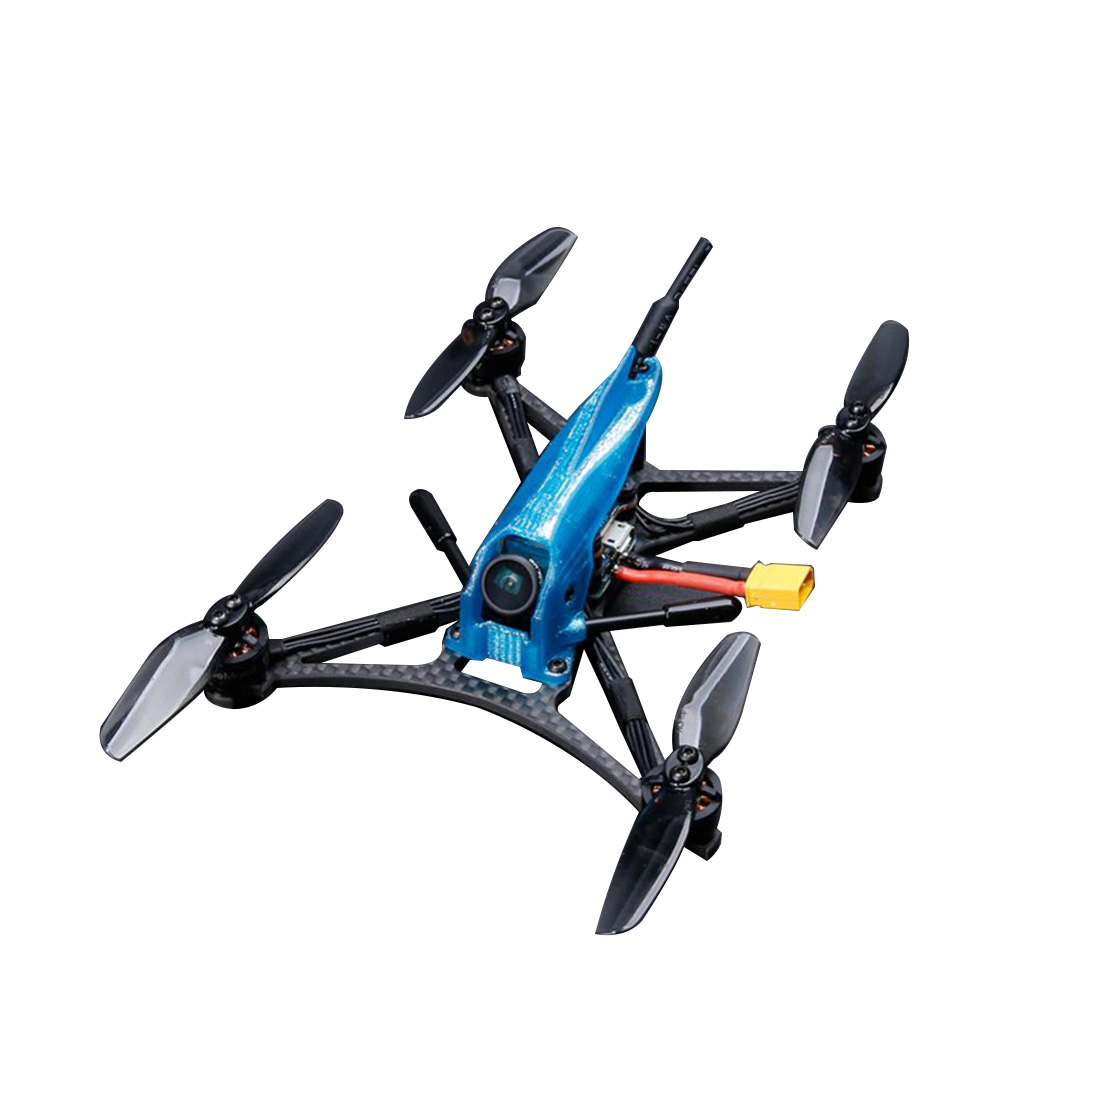 iFlight TurboBee 136RS 136mm 4S FPV Drone BNF with Canopy Caddx Camera BeeMotor 